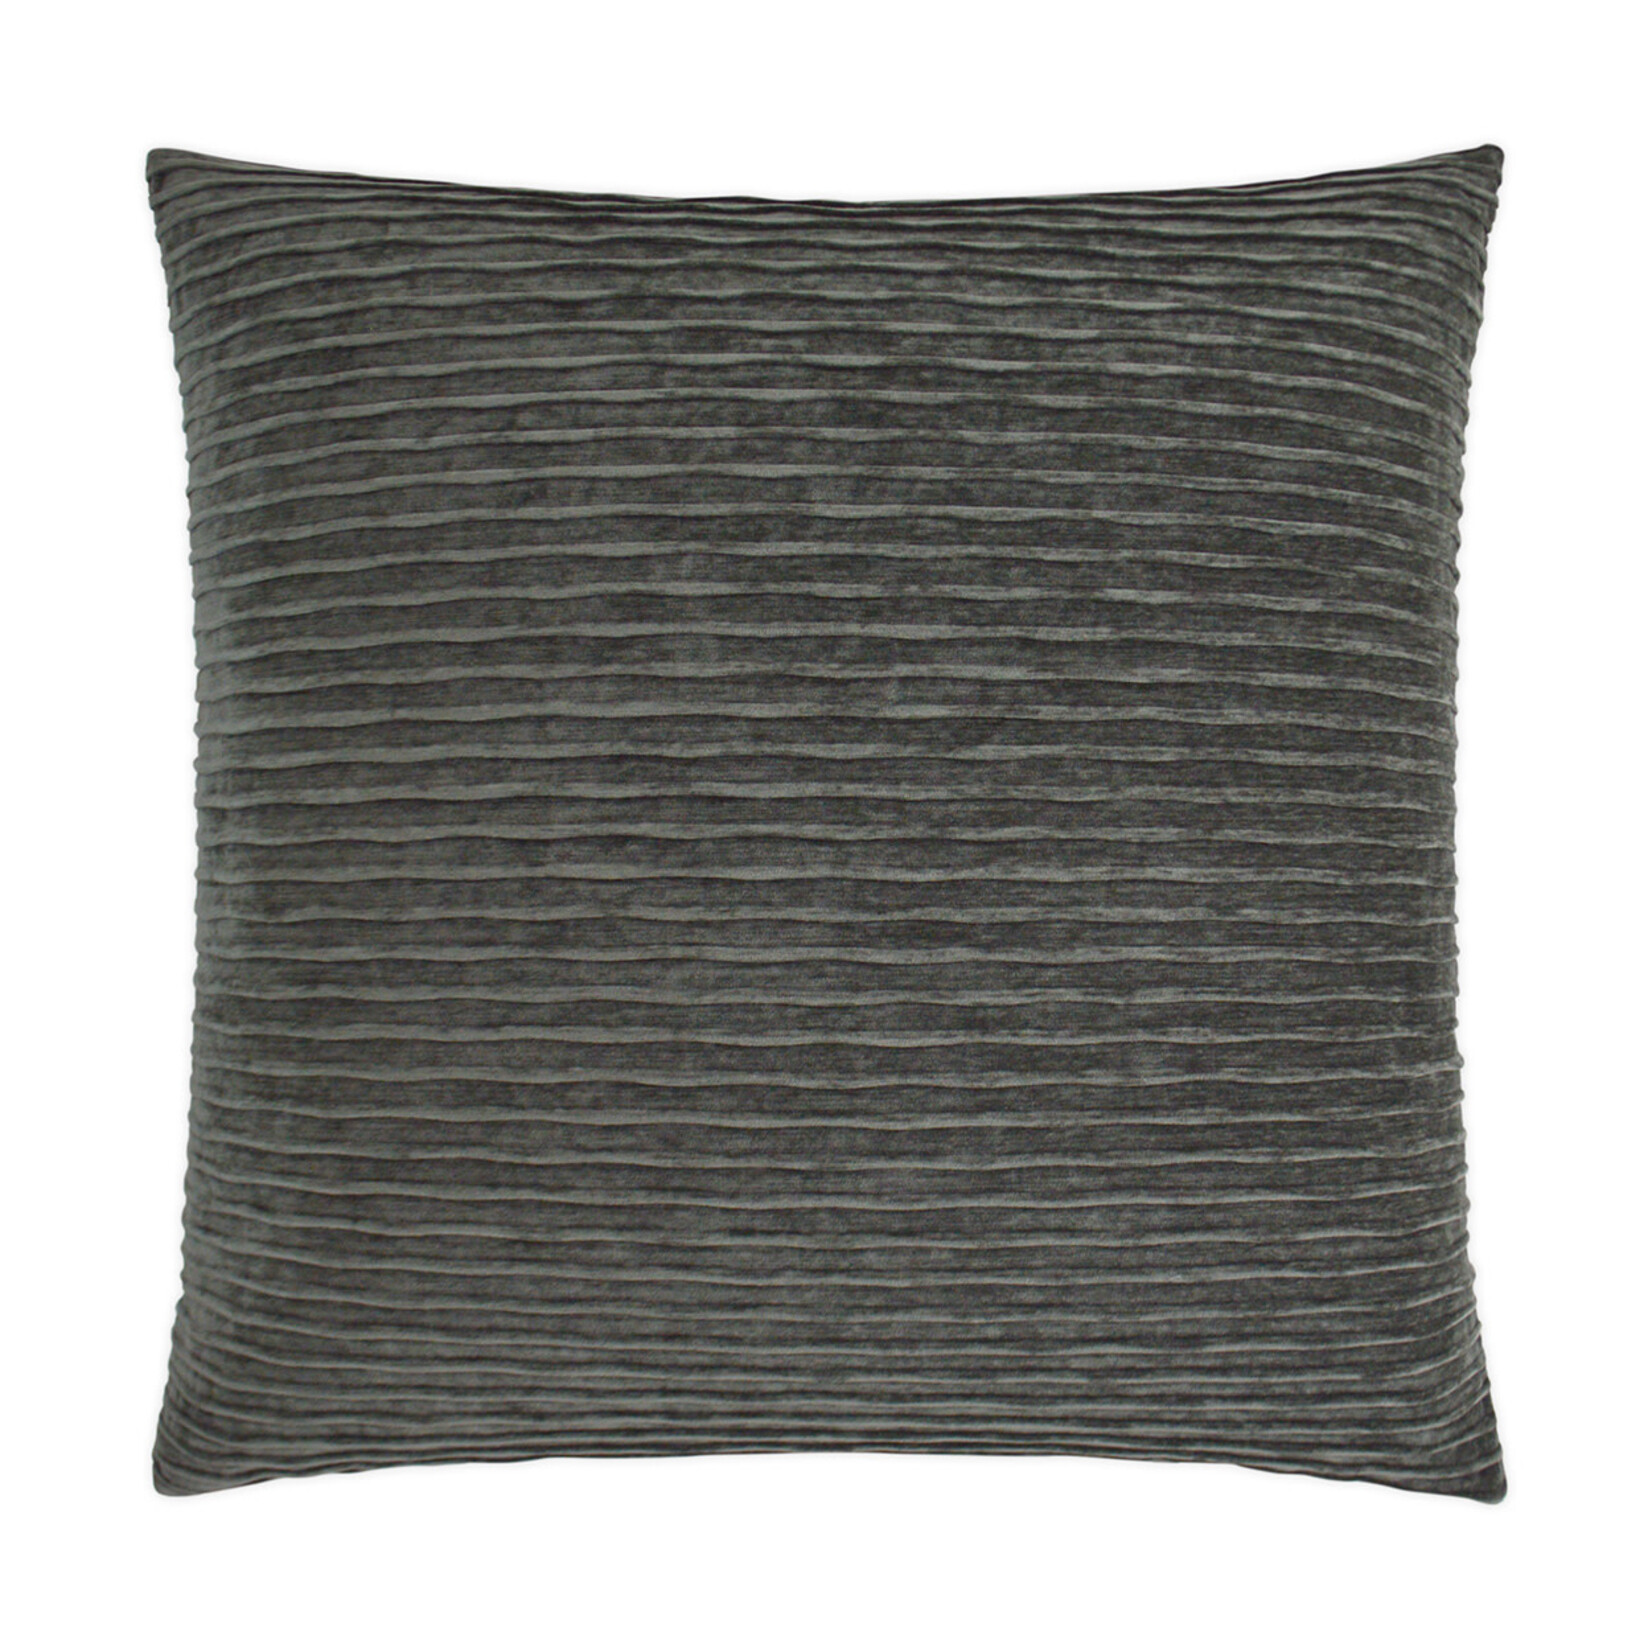 Outside The Box 24x24 Pleatte Square Feather Down Pillow In Gray